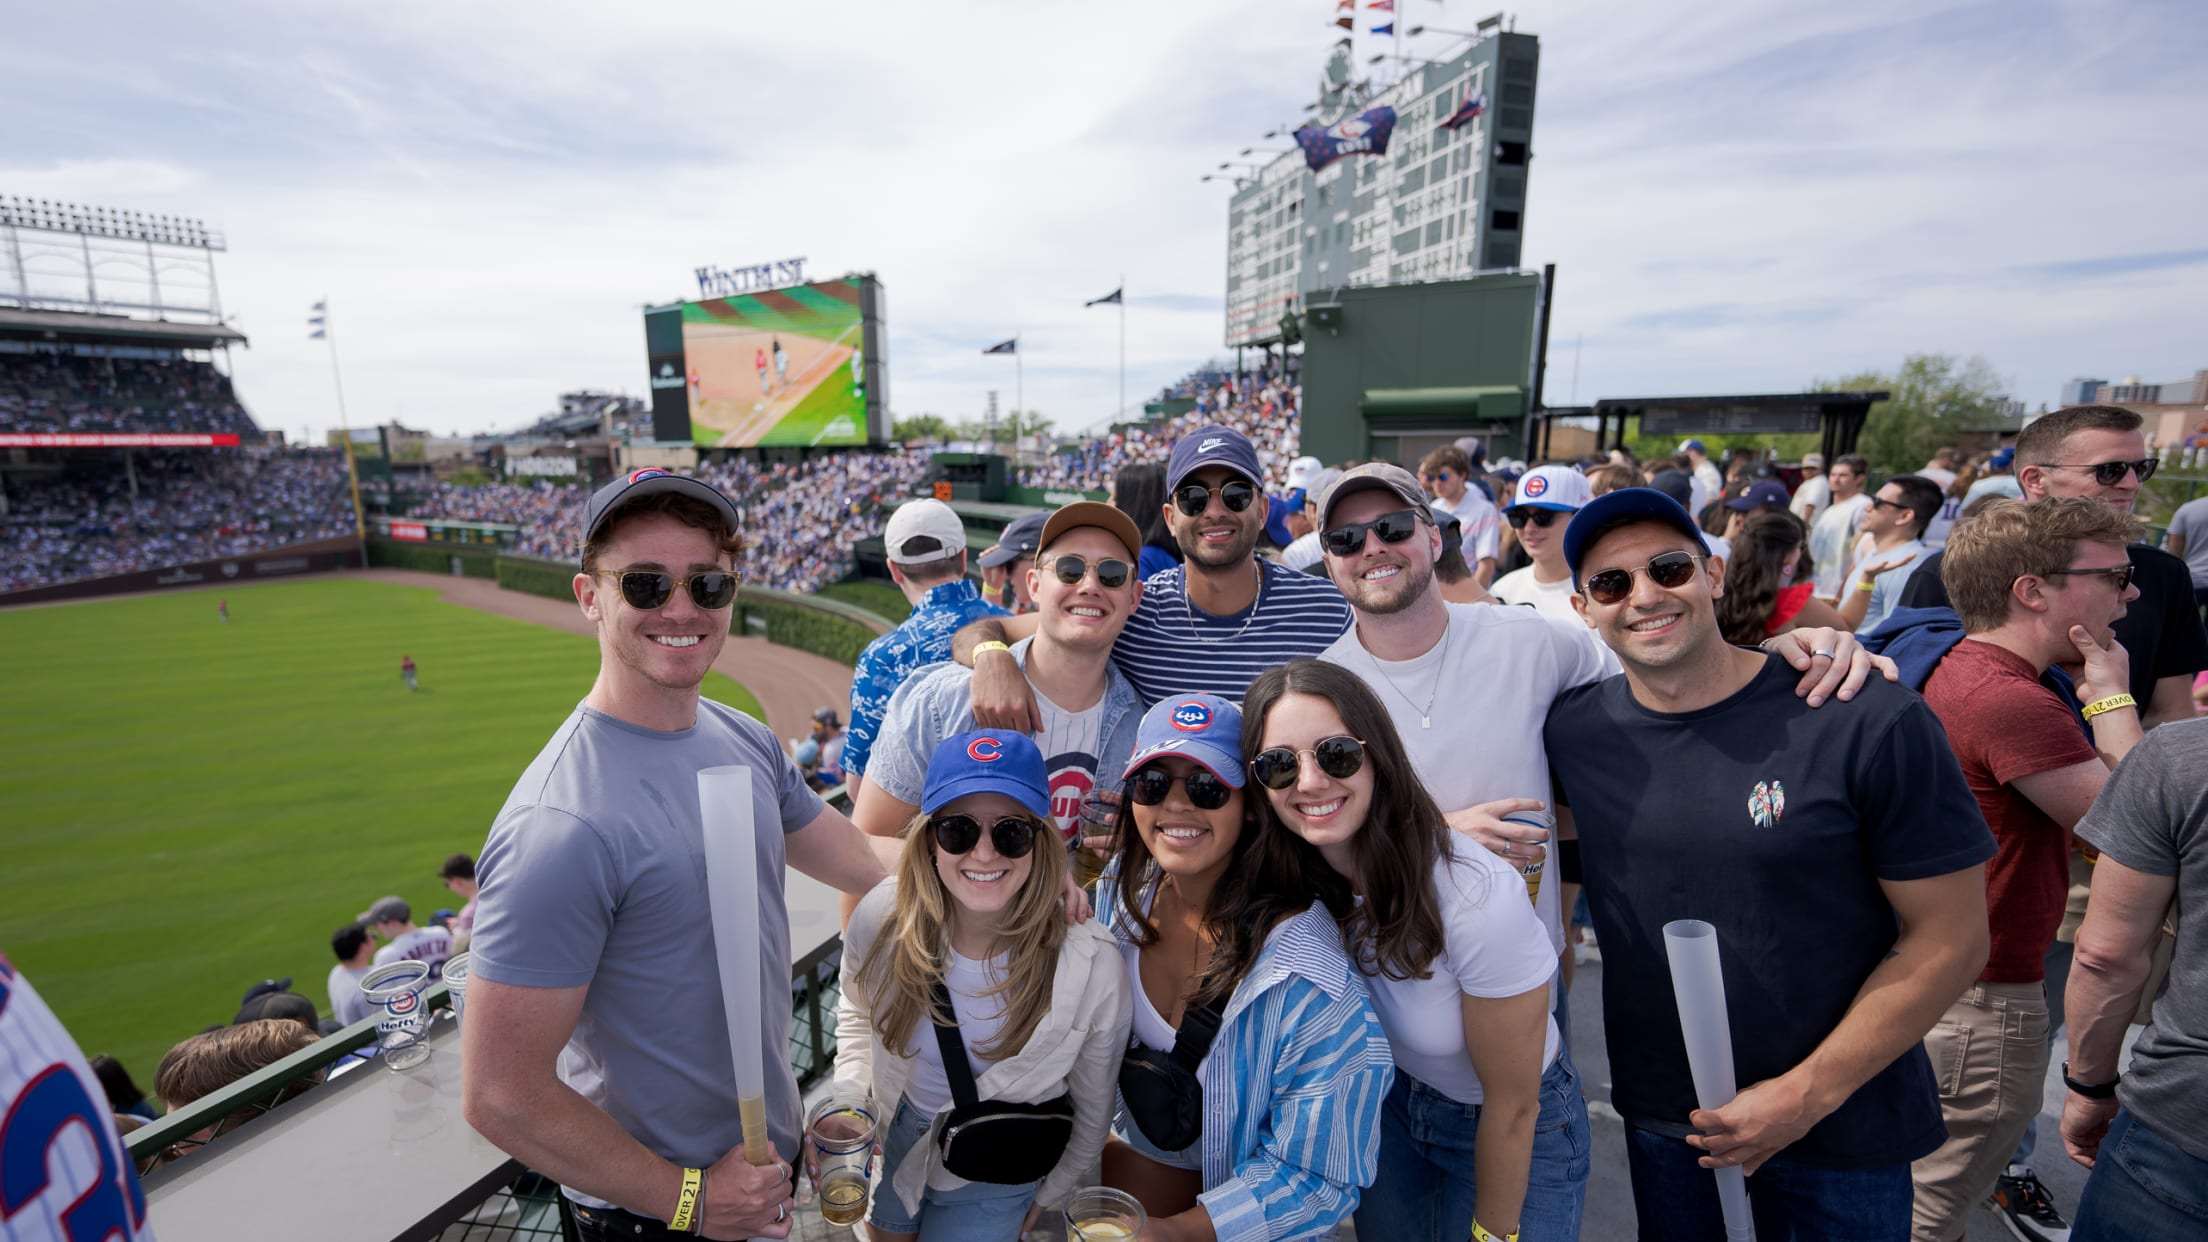 Join the fun: Two great Cubs and Sox Heckler outings this month